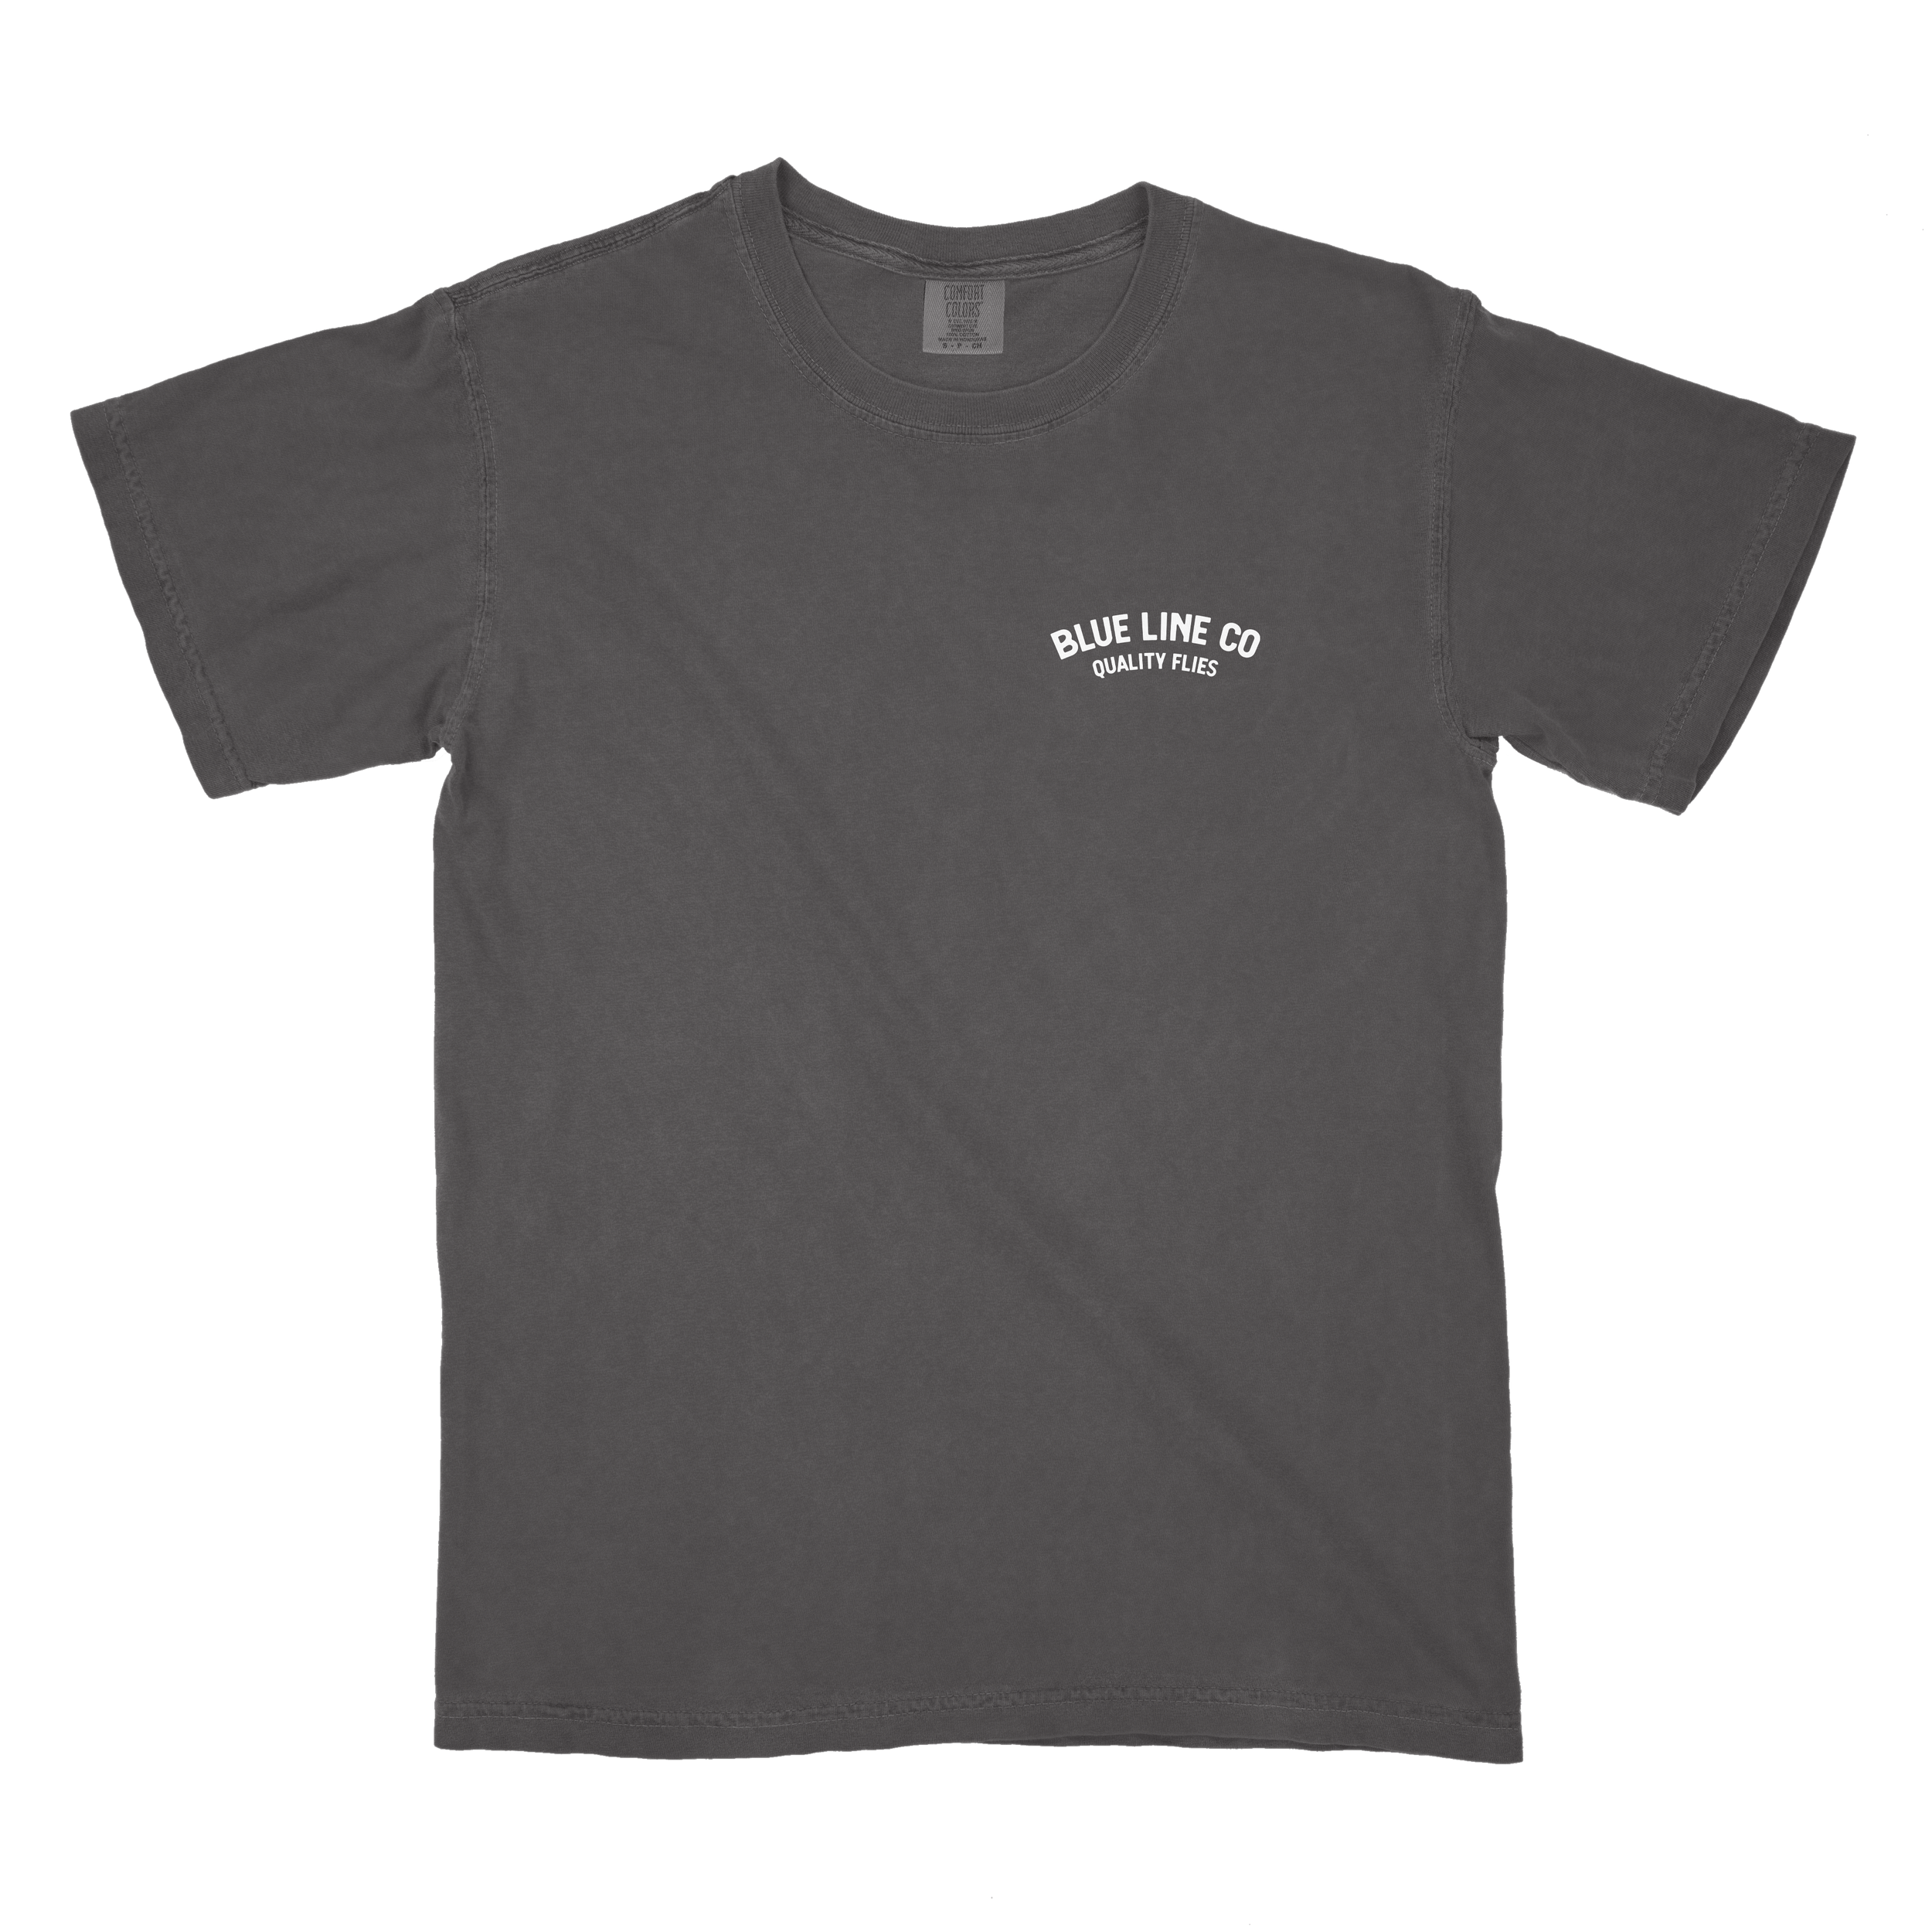 Fly Reel T-Shirt by BlueLineCo.